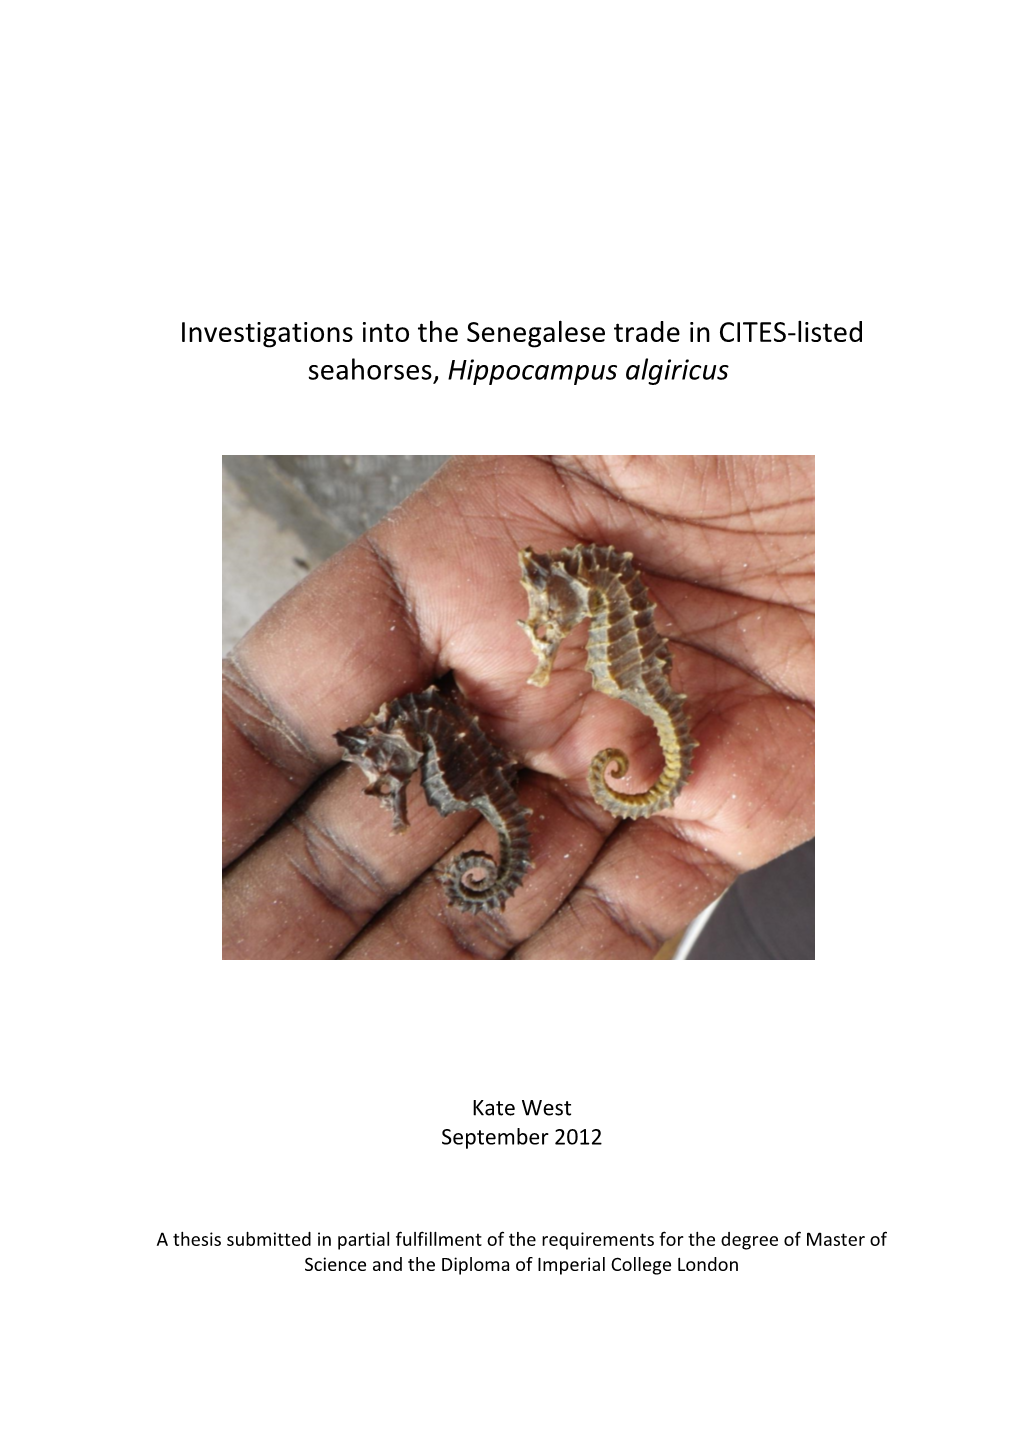 Investigations Into the Senegalese Trade in CITES-Listed Seahorses, Hippocampus Algiricus